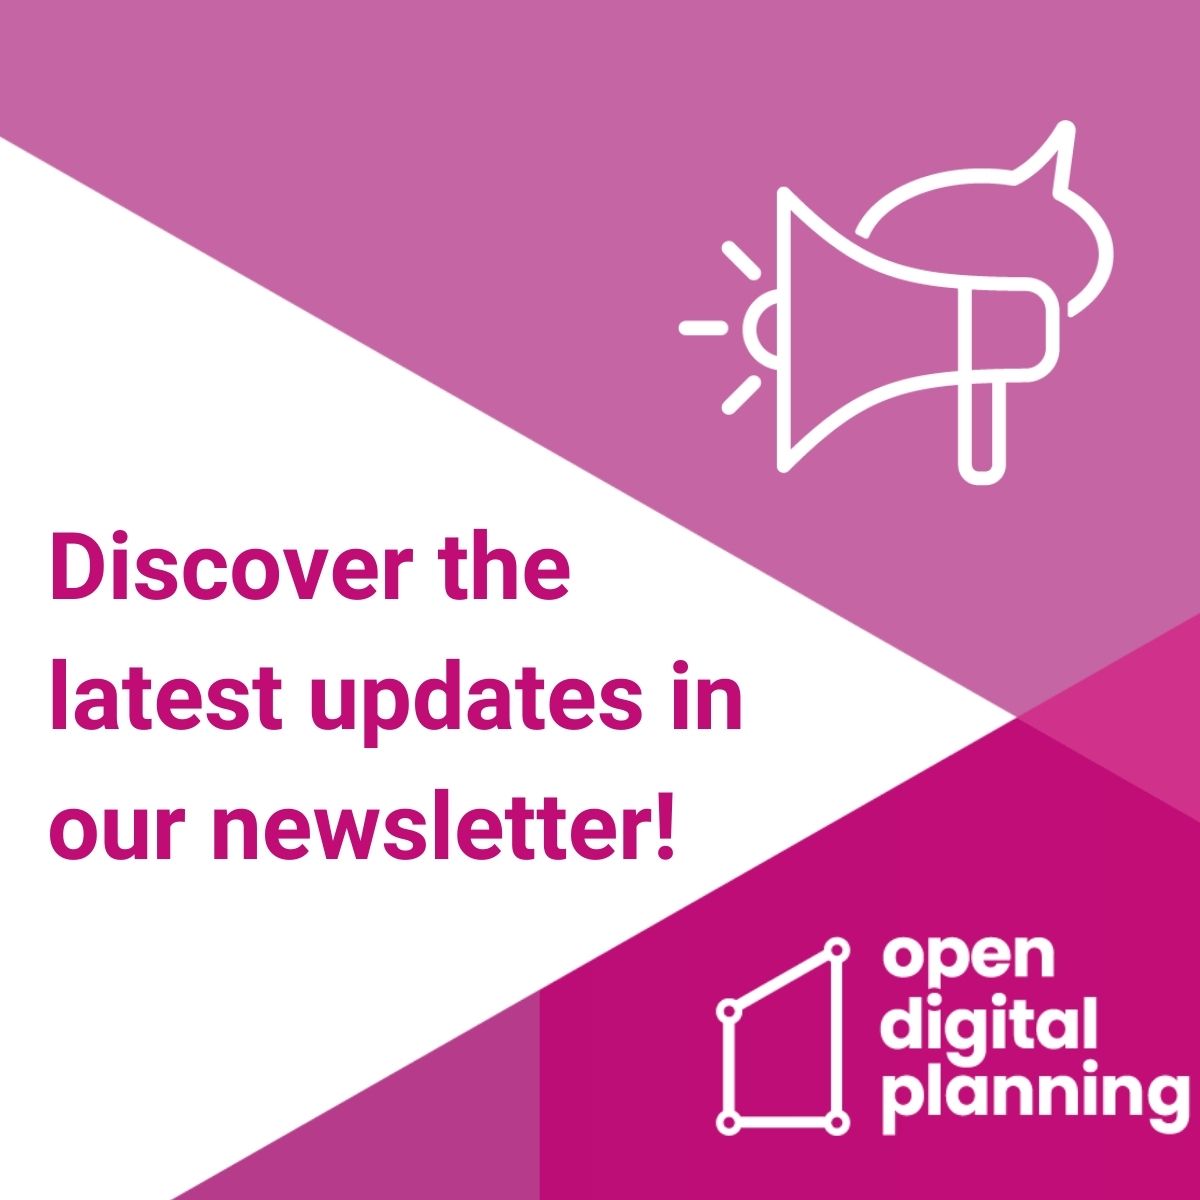 Discover the latest updates in our newsletter